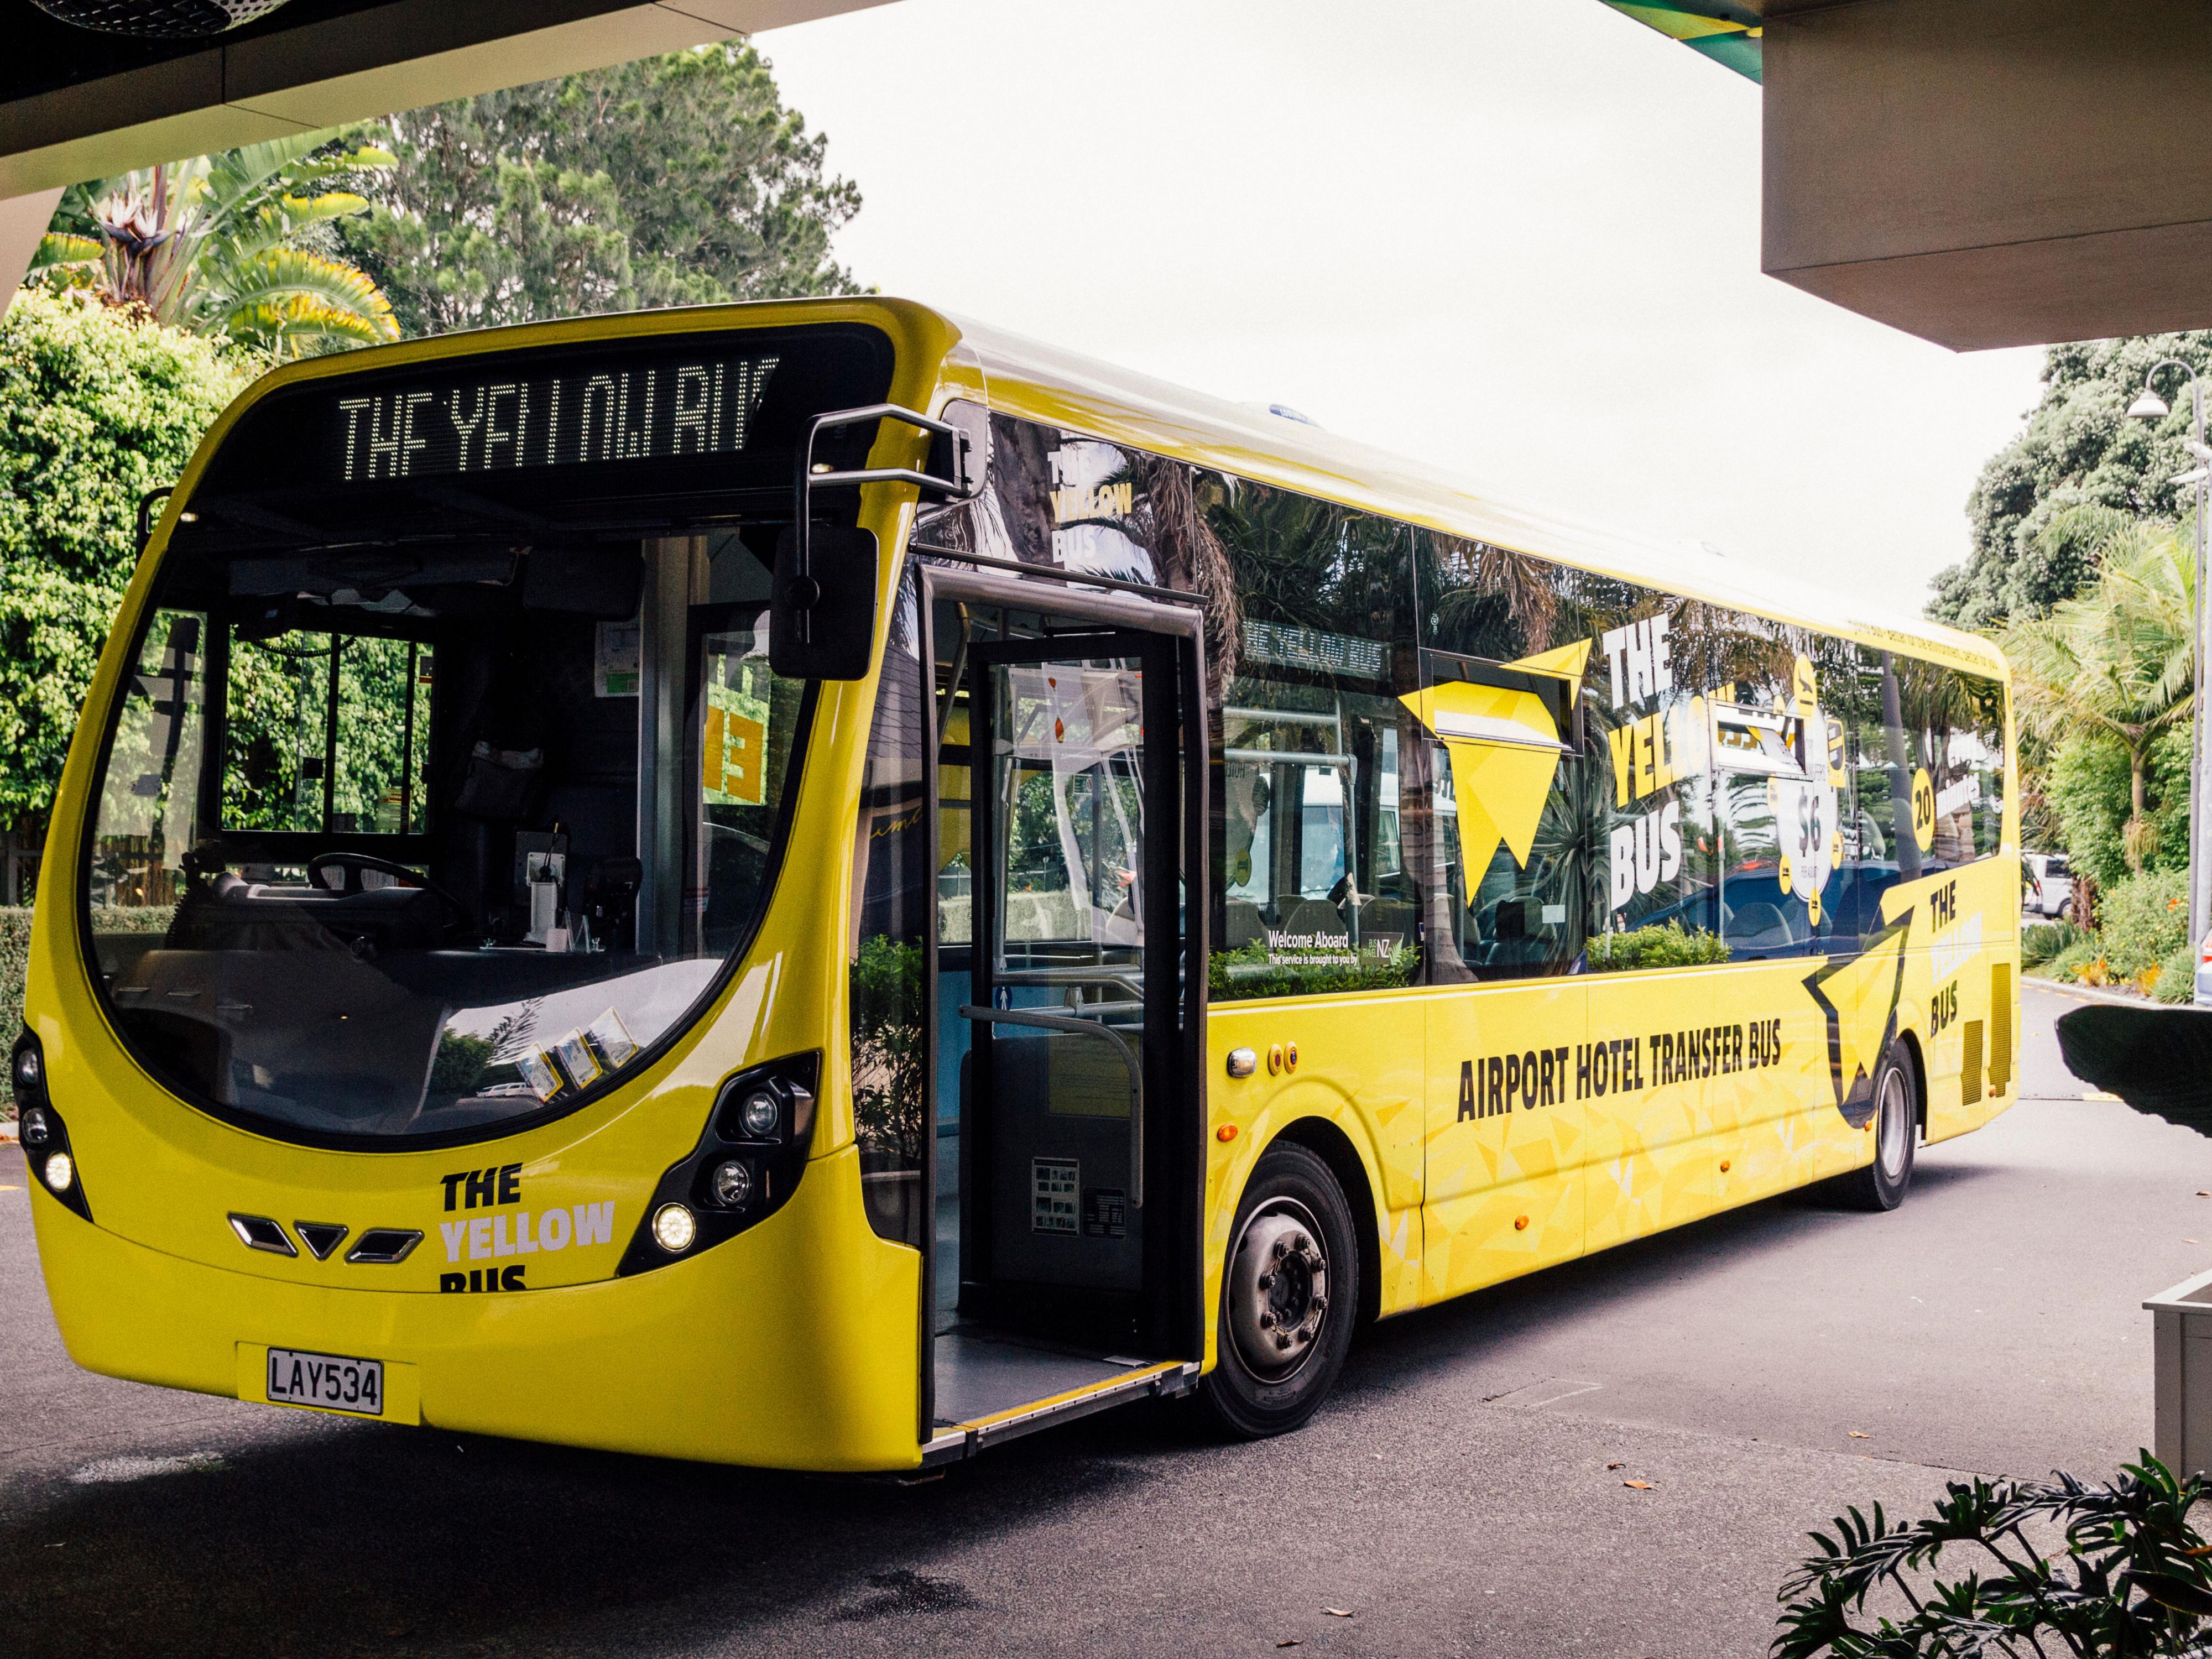 The Yellow Bus runs on a continuous 24/7 circuit approximately every 40-50 minutes. Ticket machines are located at Auckland Airport bus stops at the international and domestic terminals and in the Hotel’s Lobby. The fare is $8.00 one way. Tickets must be purchased prior to boarding the bus. Children 12 and under ride The Yellow Bus for free.